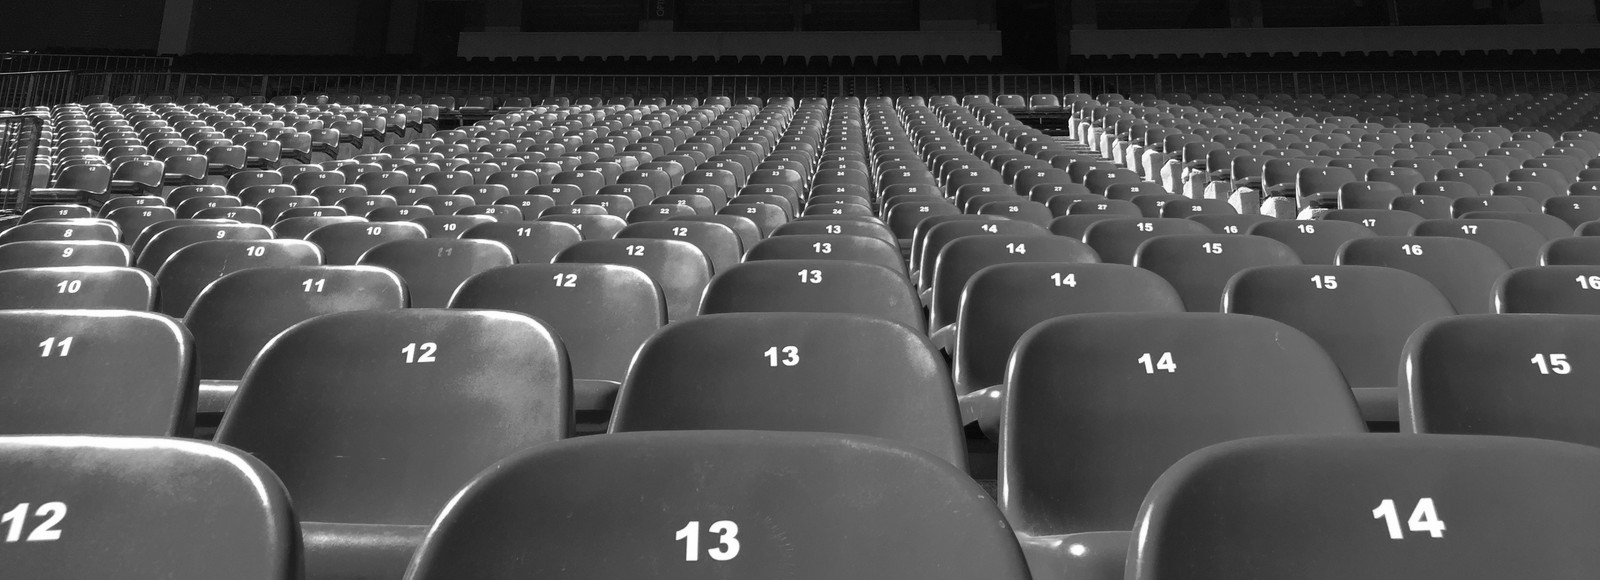 Seat numbers